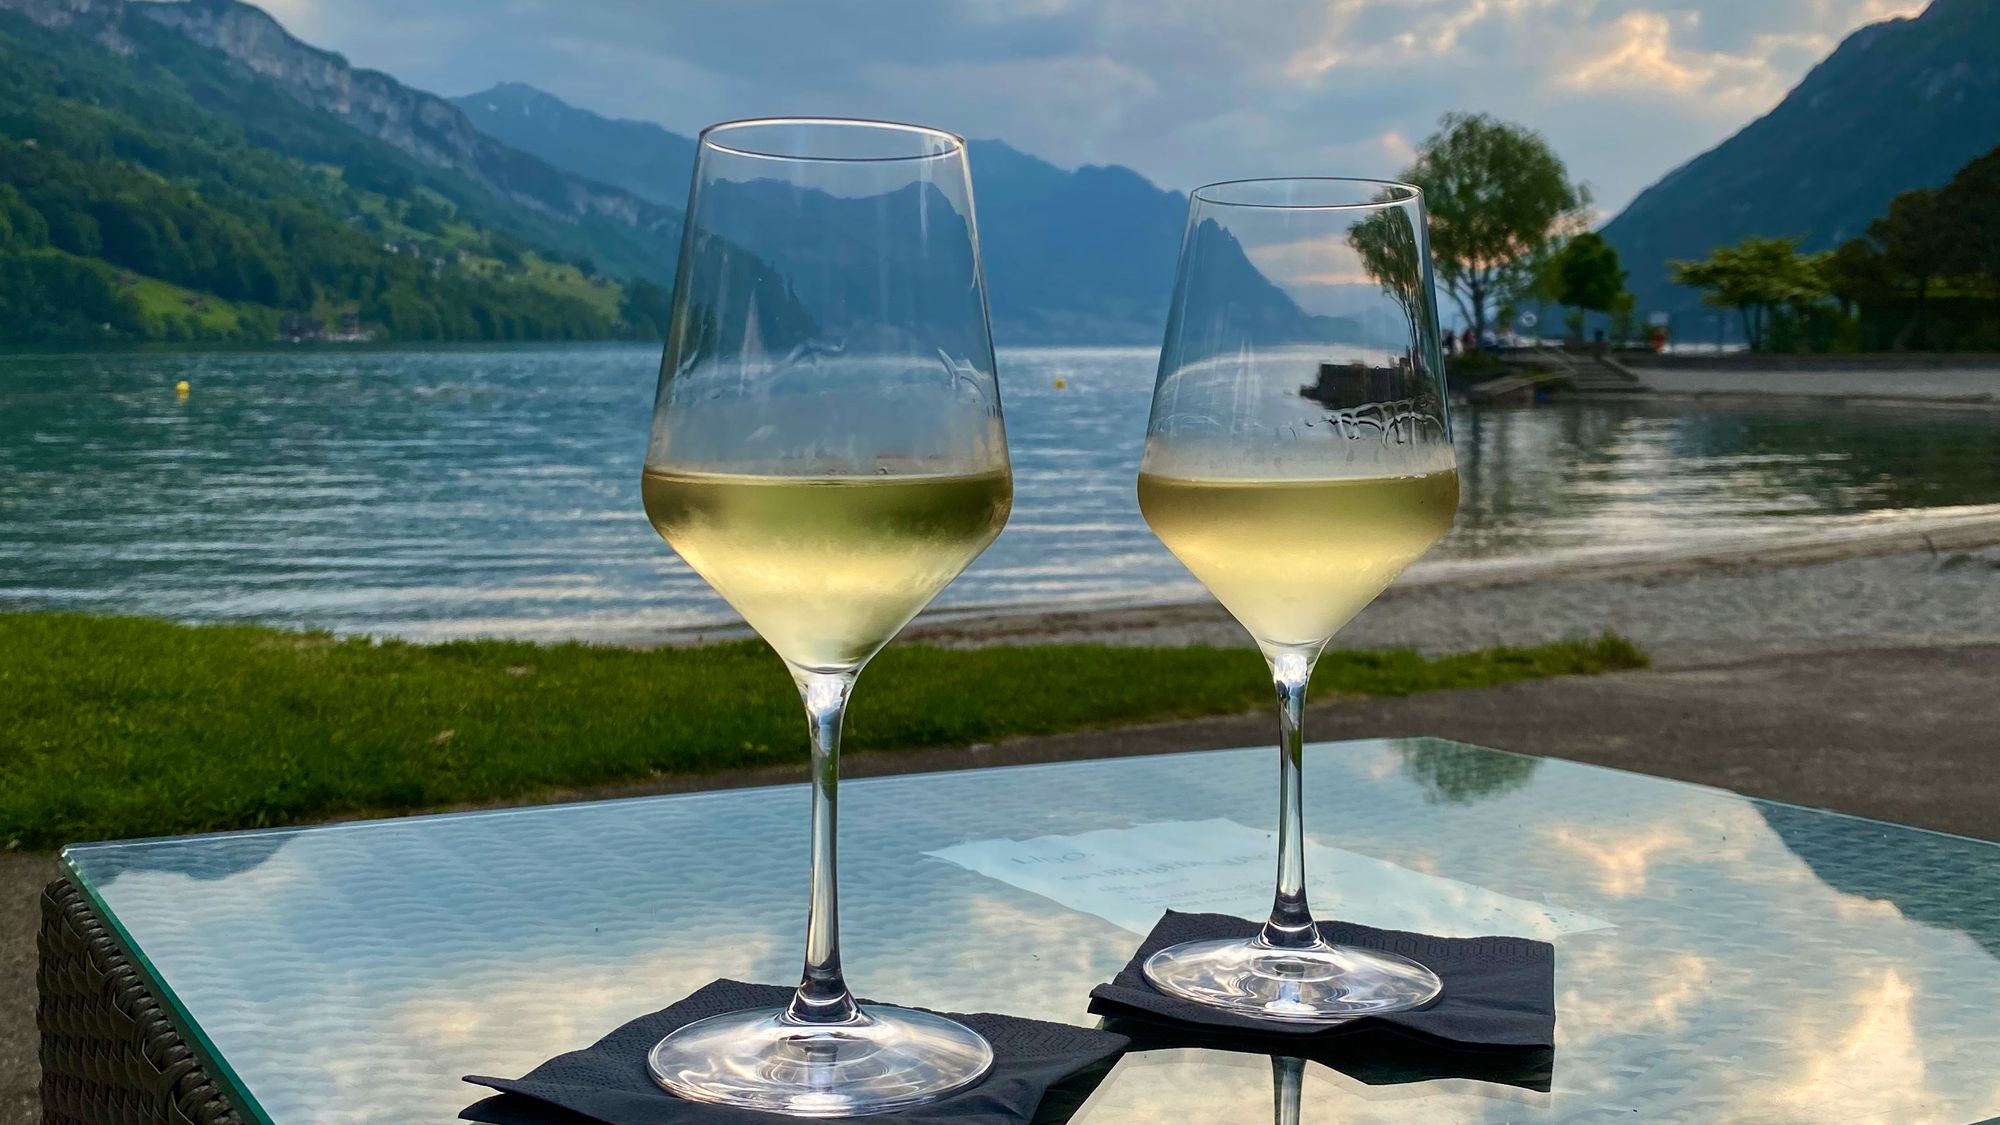 Sunset over lake Lucerne with two glasses of wine in front